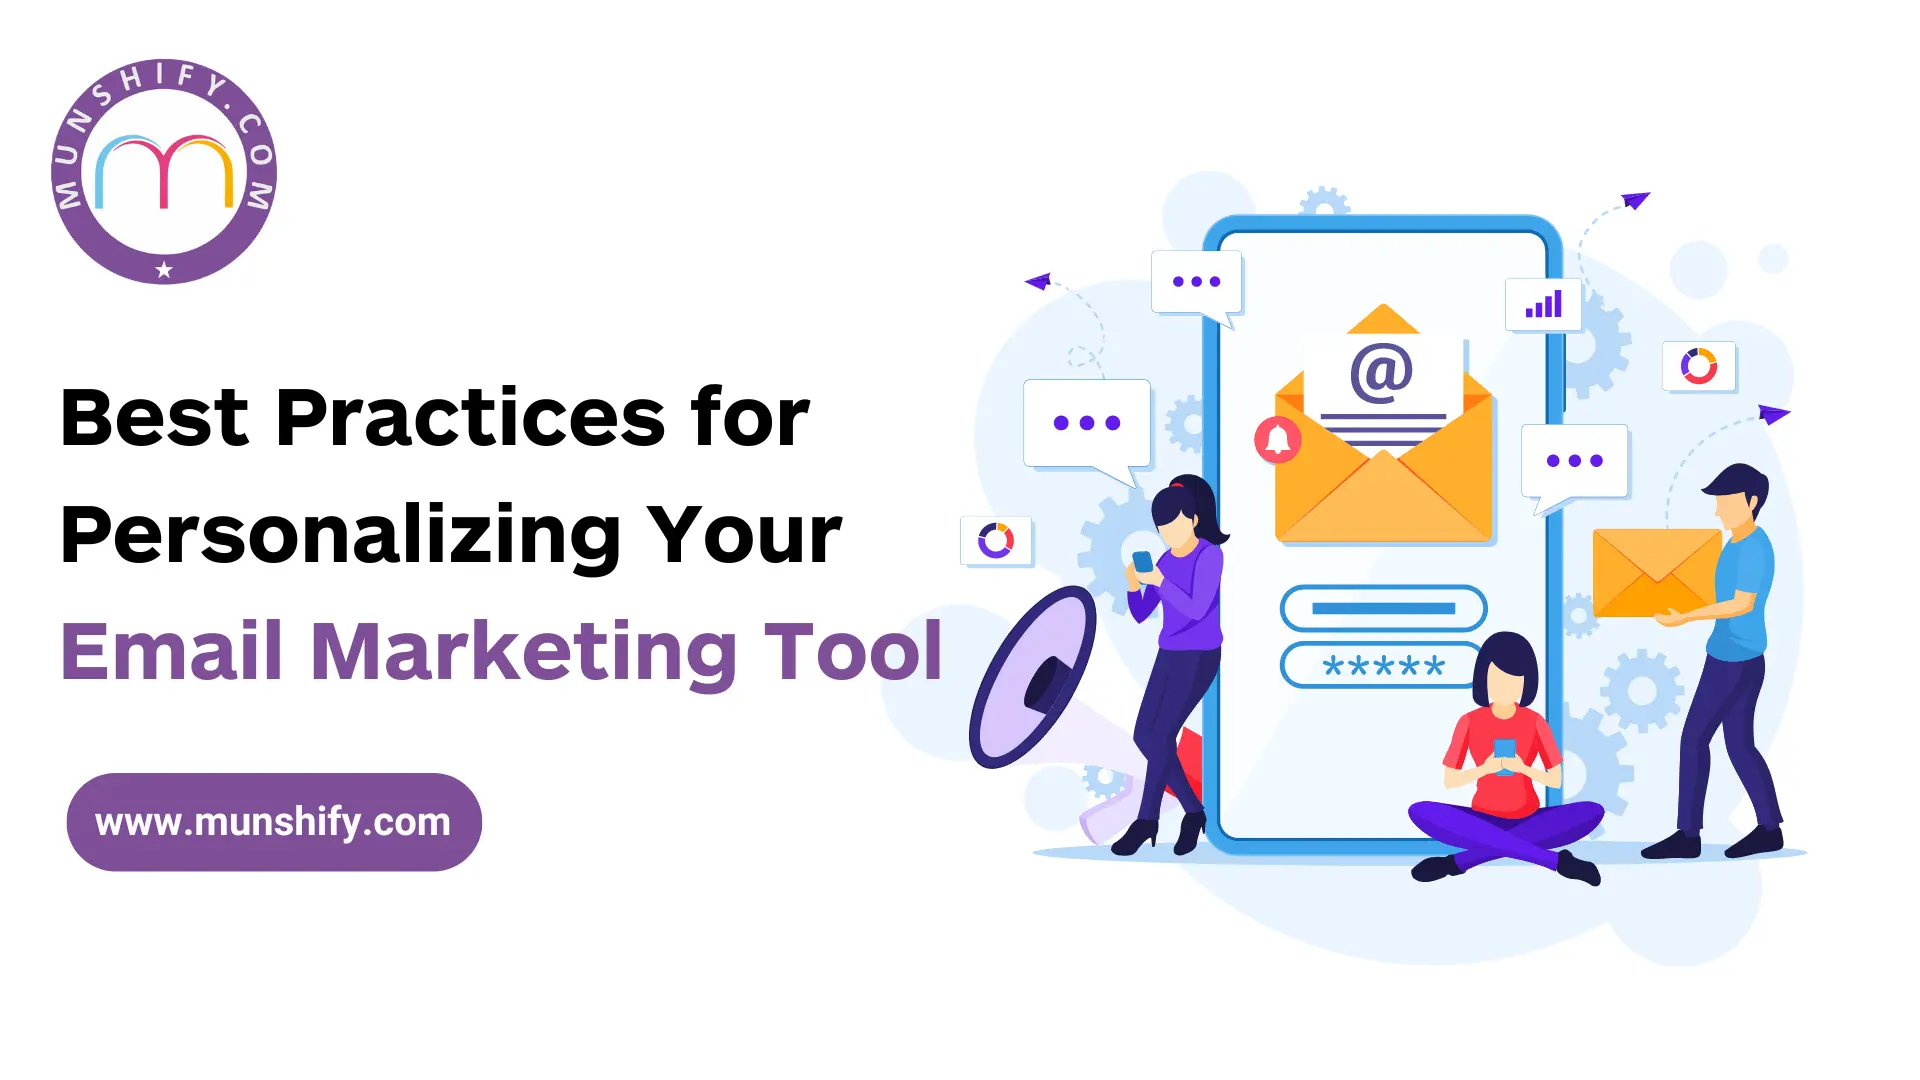 Best Practices for Personalizing Your Email Marketing Tool